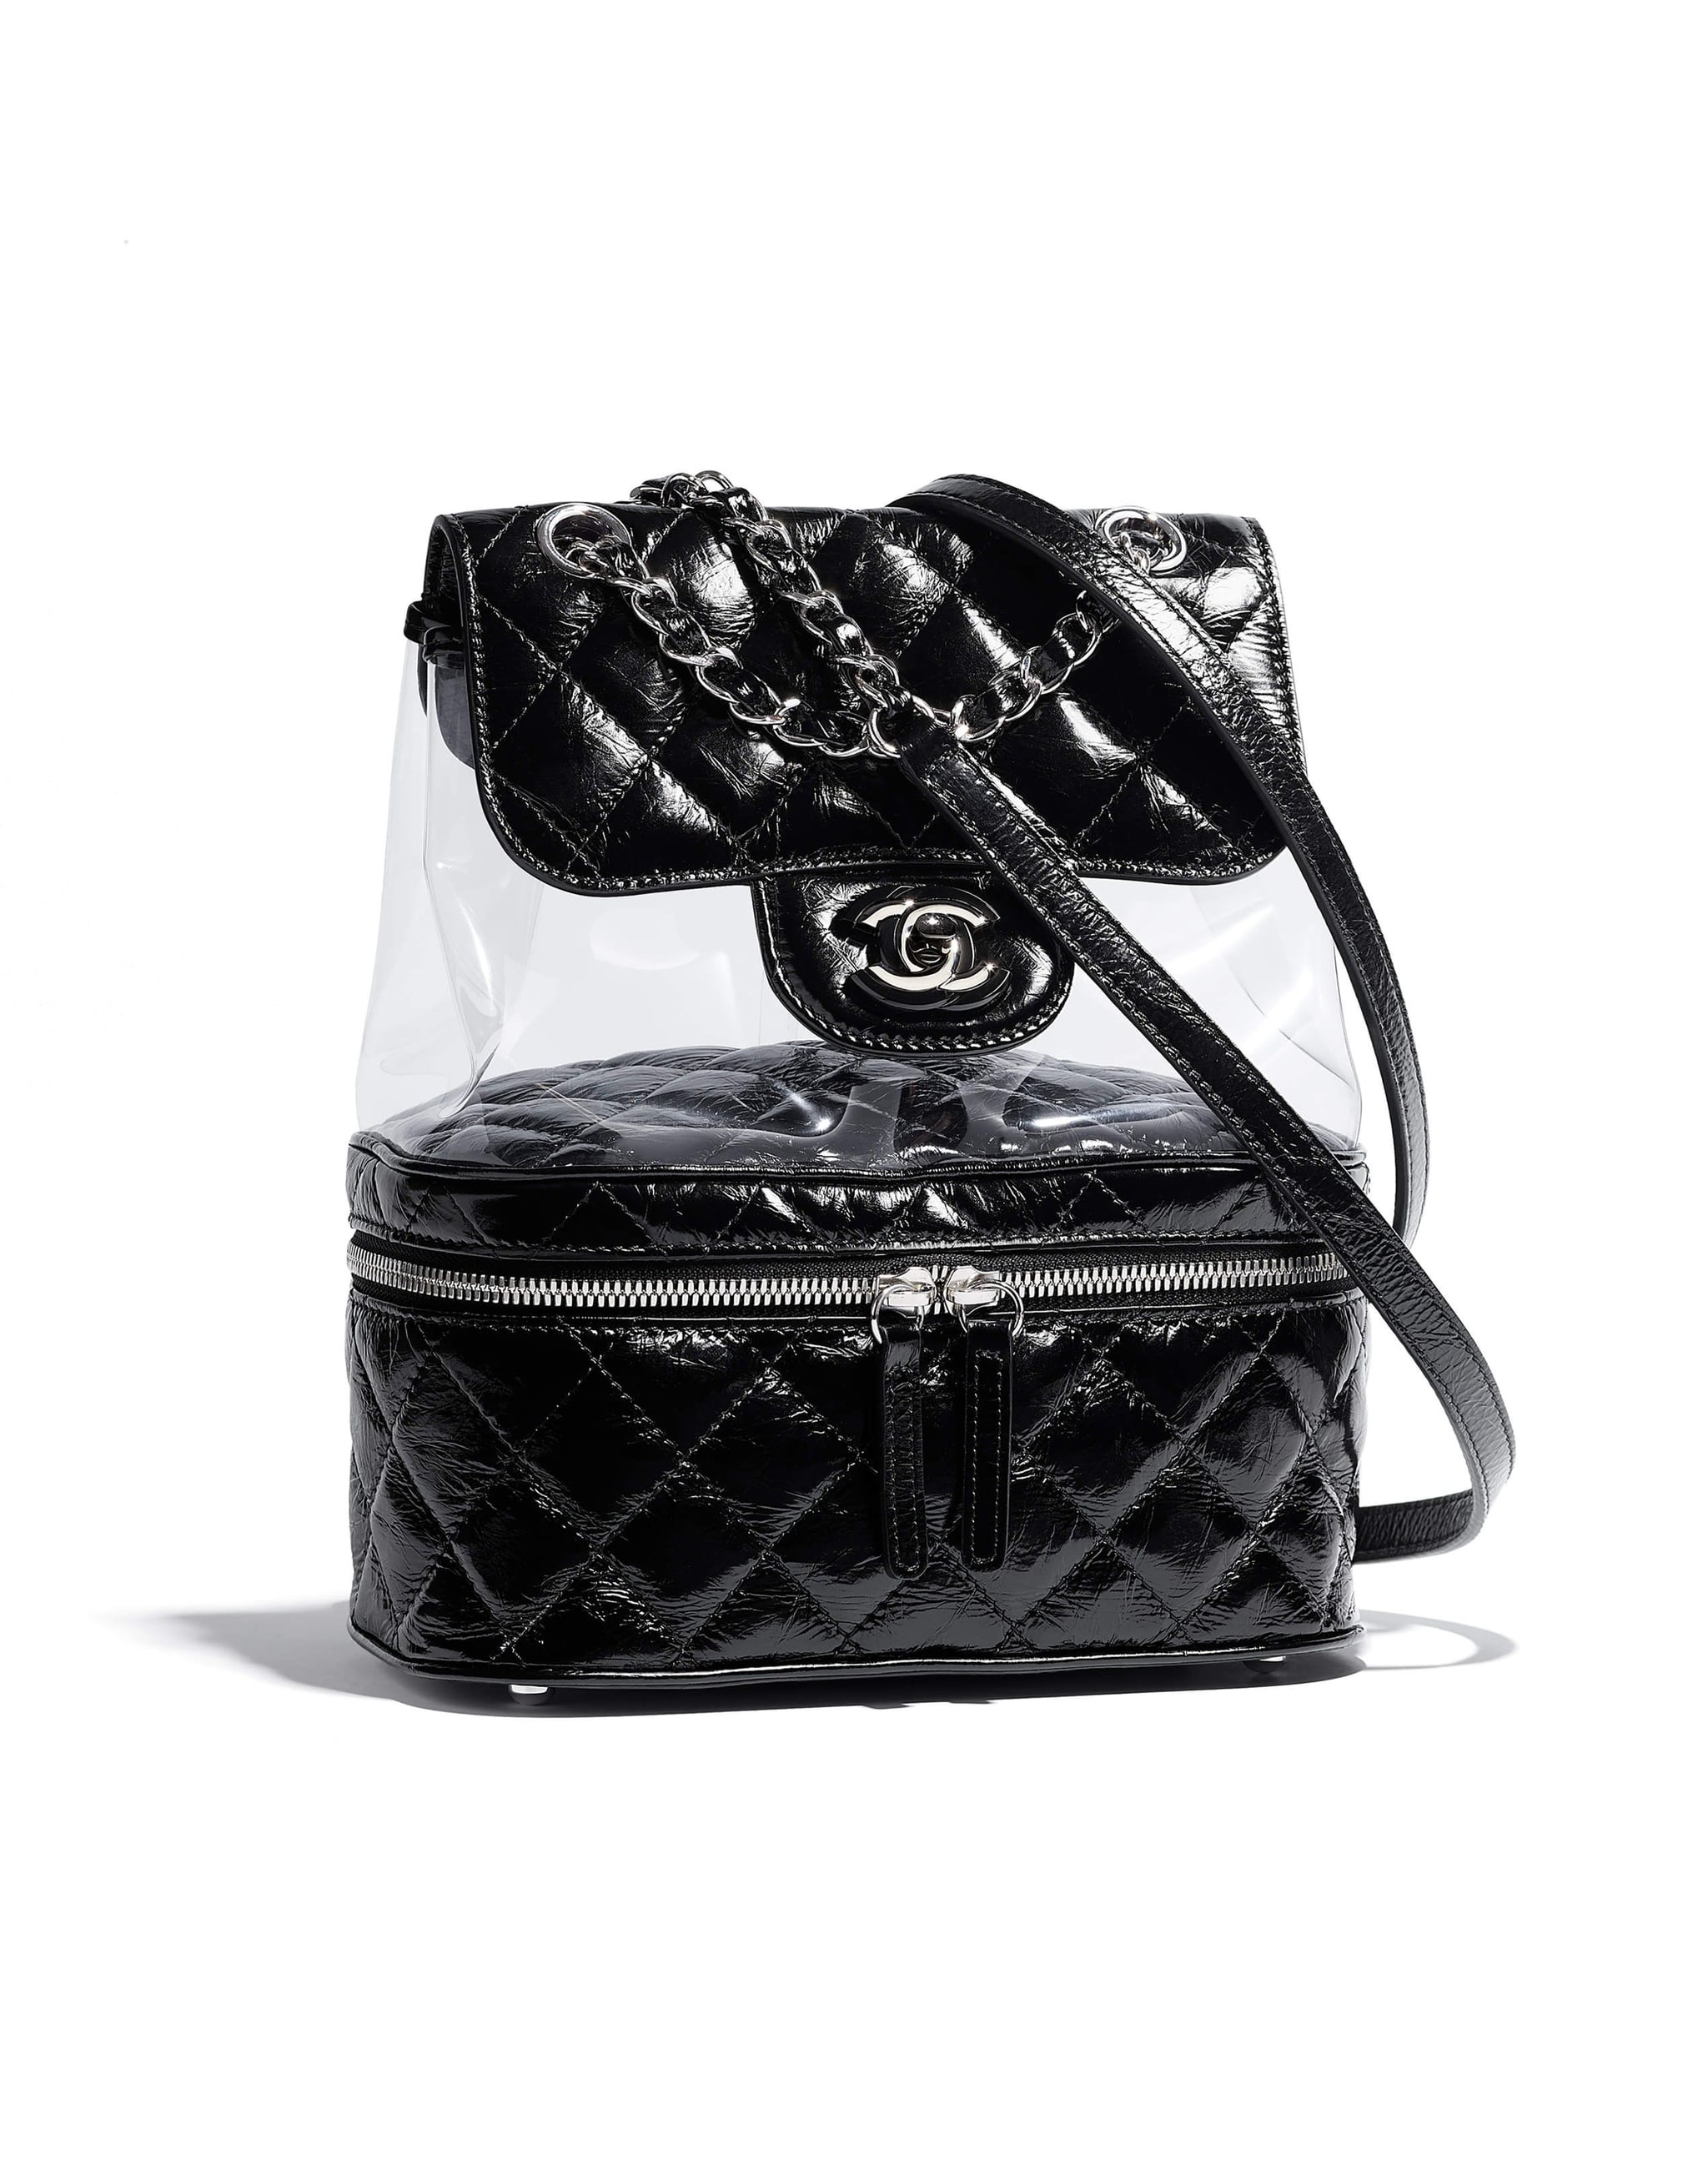 Kylie Jenner Wearing a Chanel Backpack